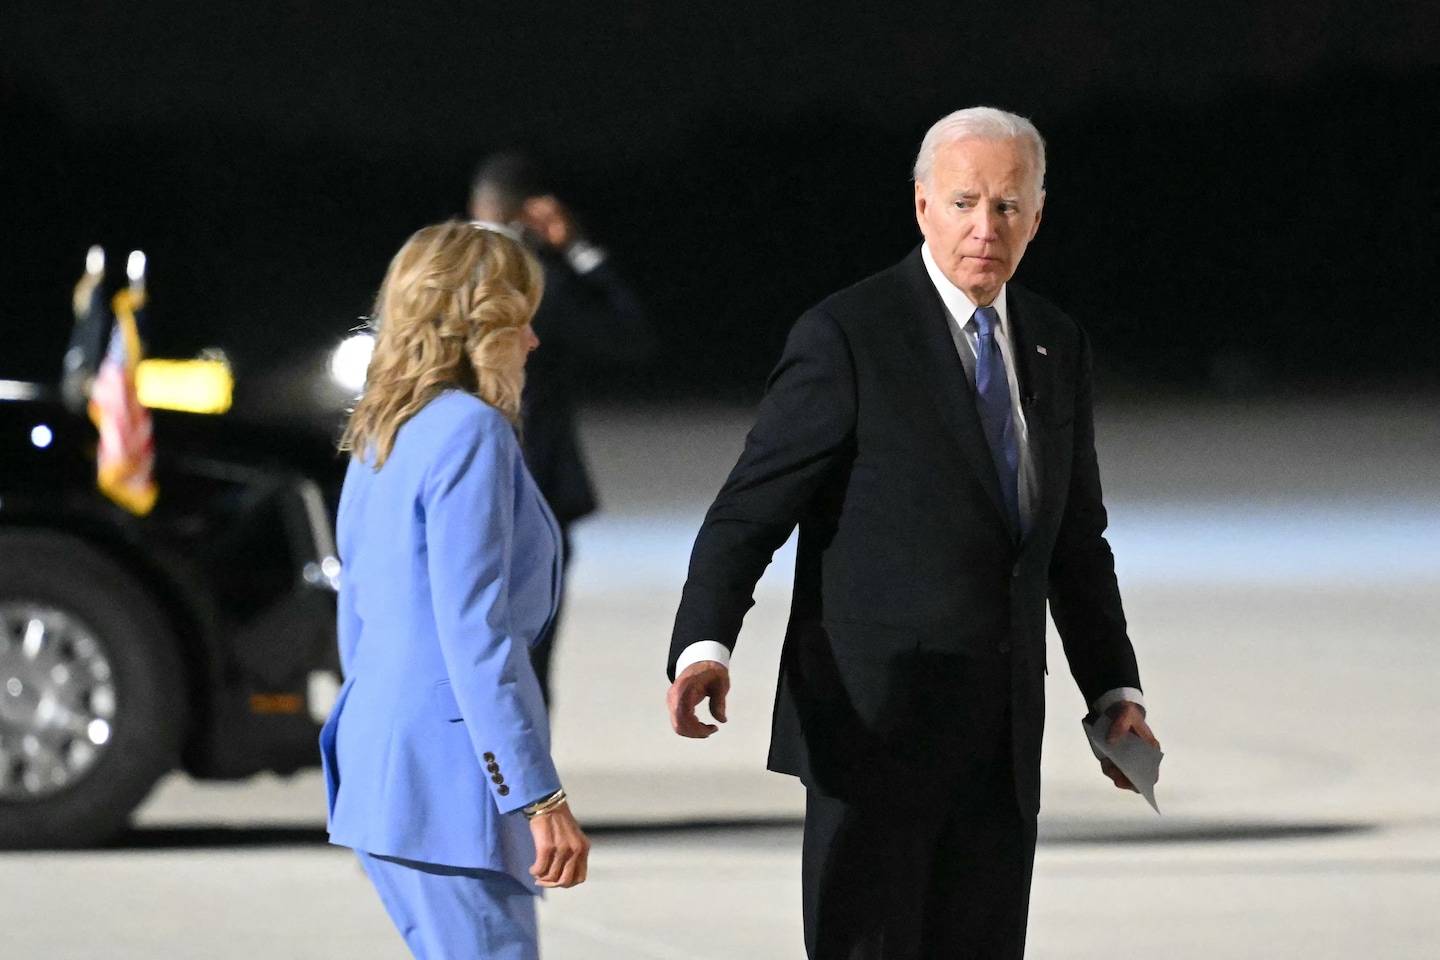 How the world reacted to Biden’s ‘disastrous’ debate performance